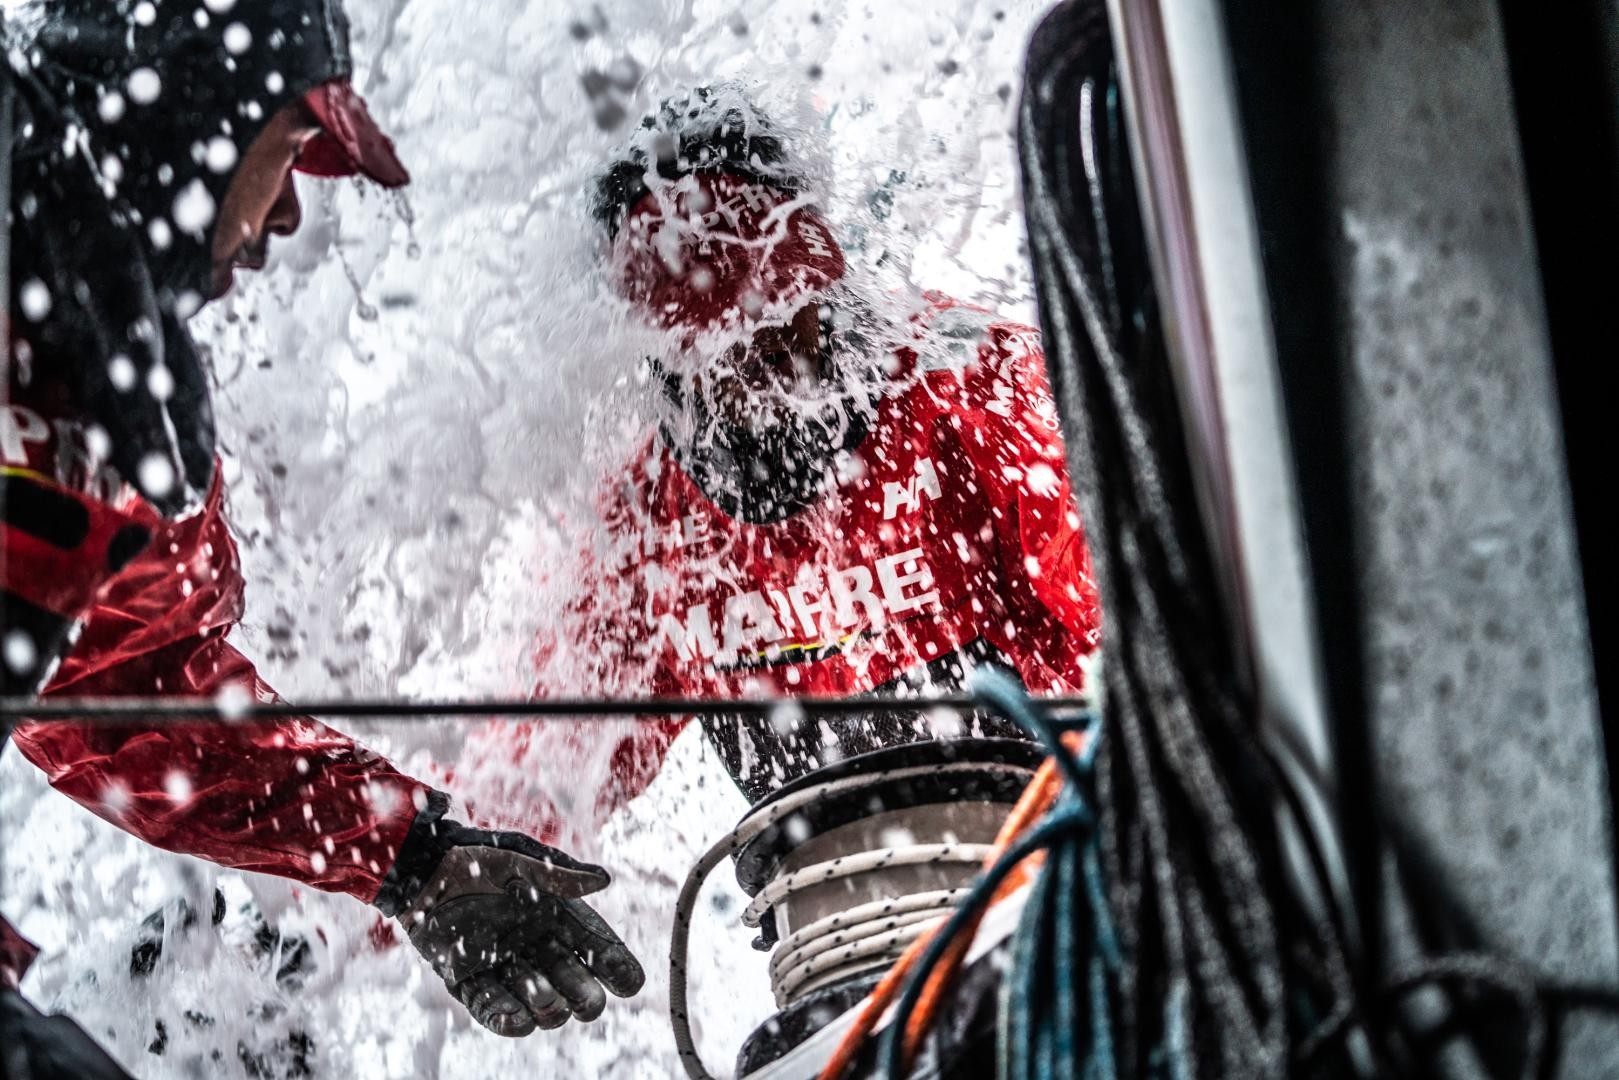 Leg 10, from Cardiff to Gothenburg, day 04 on board MAPFRE, Antonio Cuervas-Mons being smashed y the water